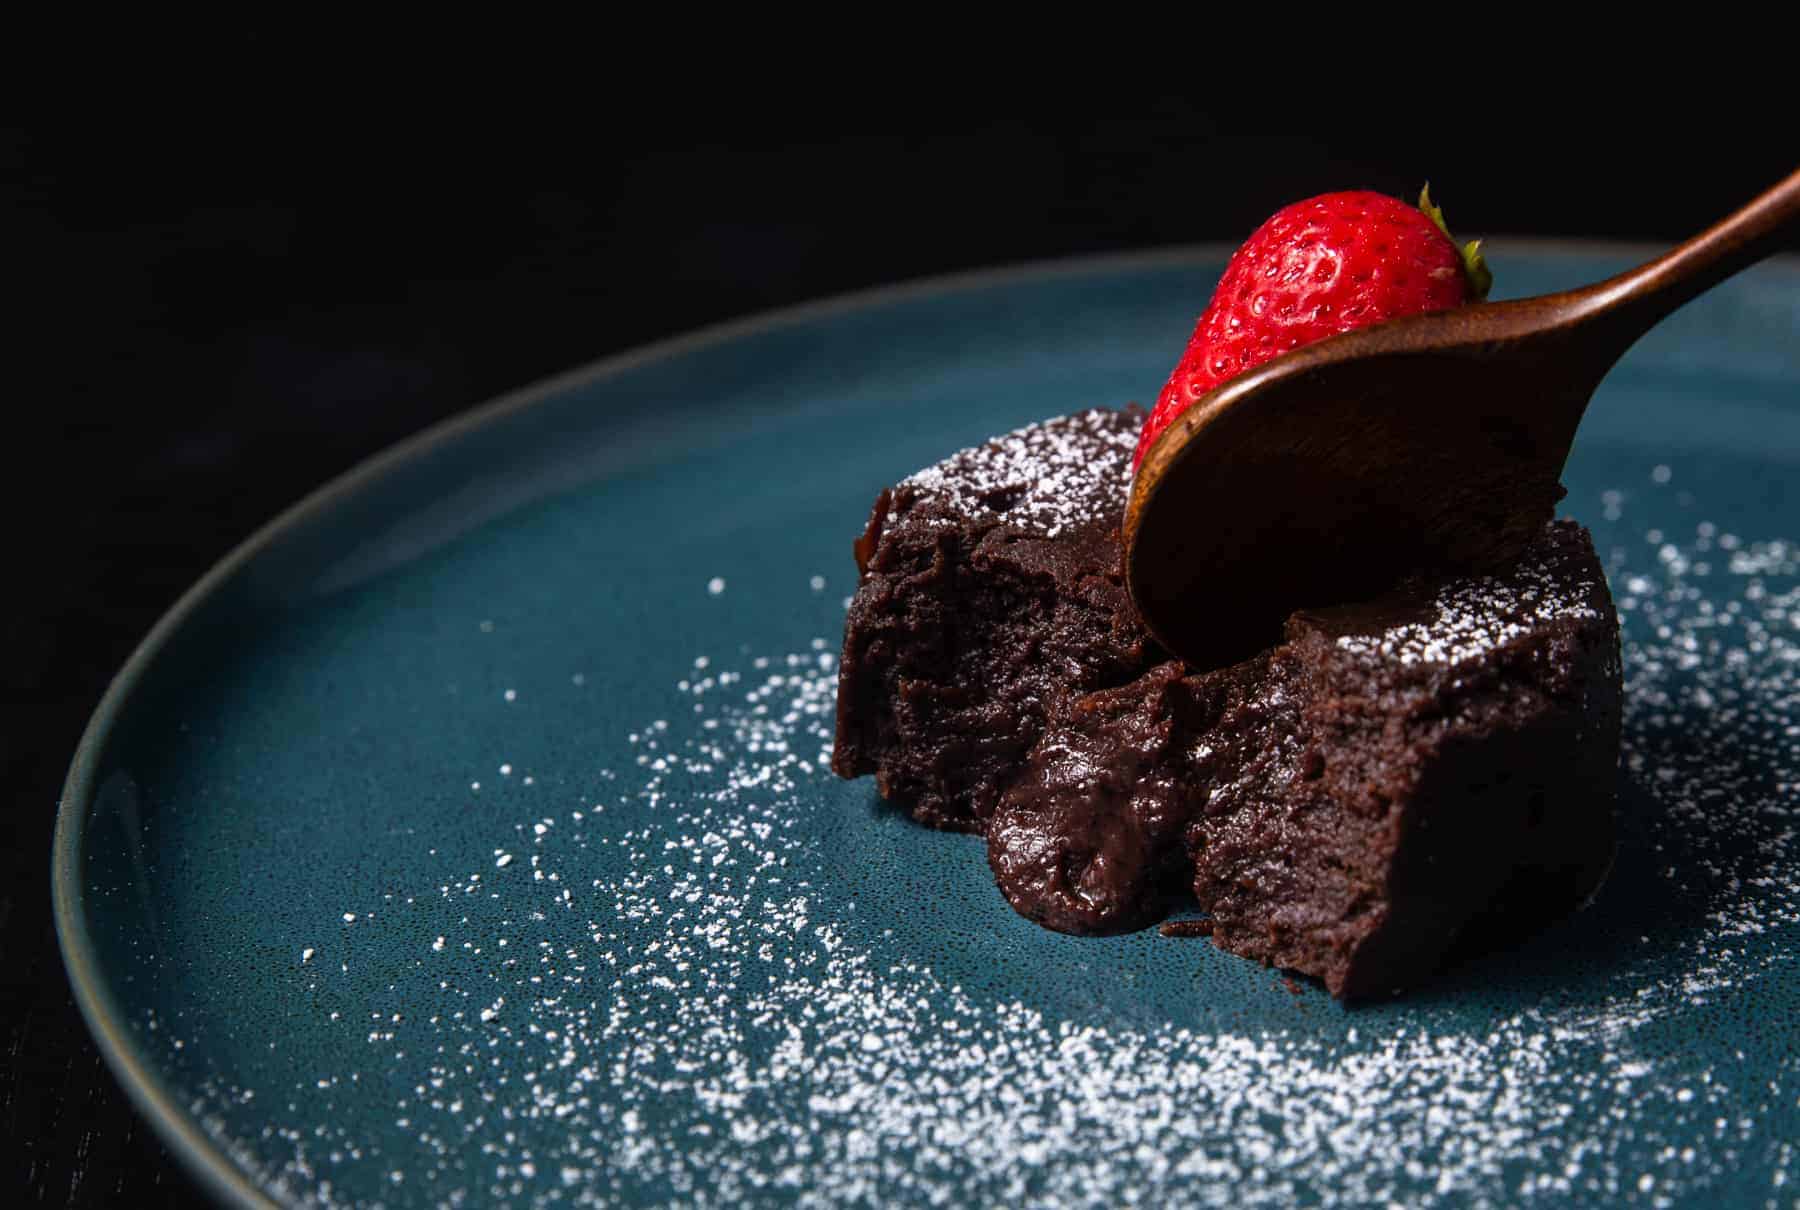 🍫 We Know Whether You’re an Introvert, Extrovert, Or Ambivert Based on How You Rate These Chocolate Desserts chocolate lava cake